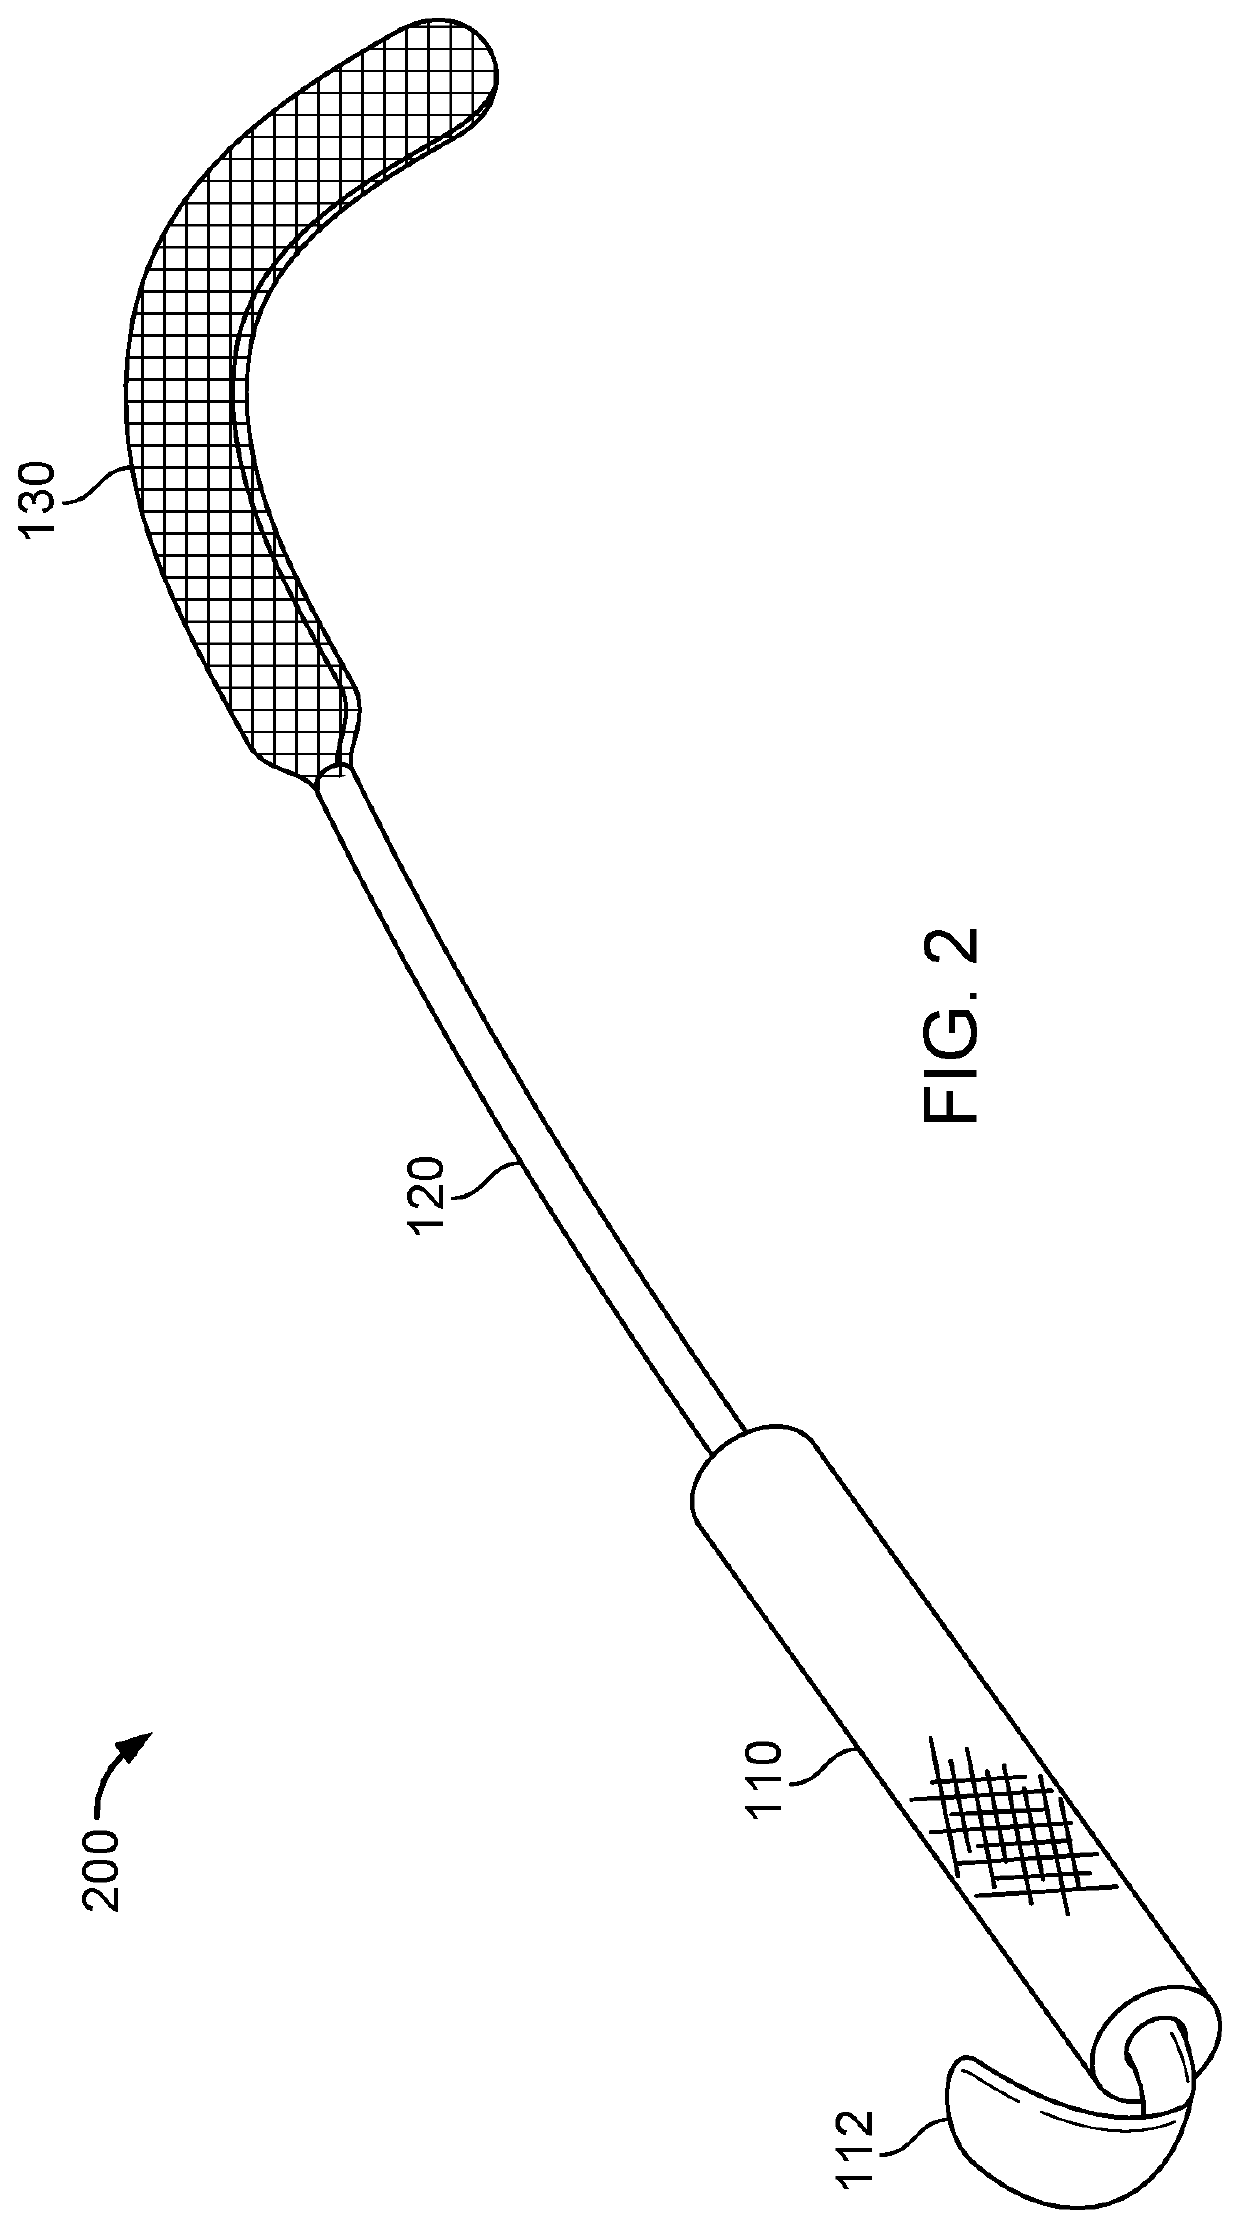 Transoral surgical devices and methods